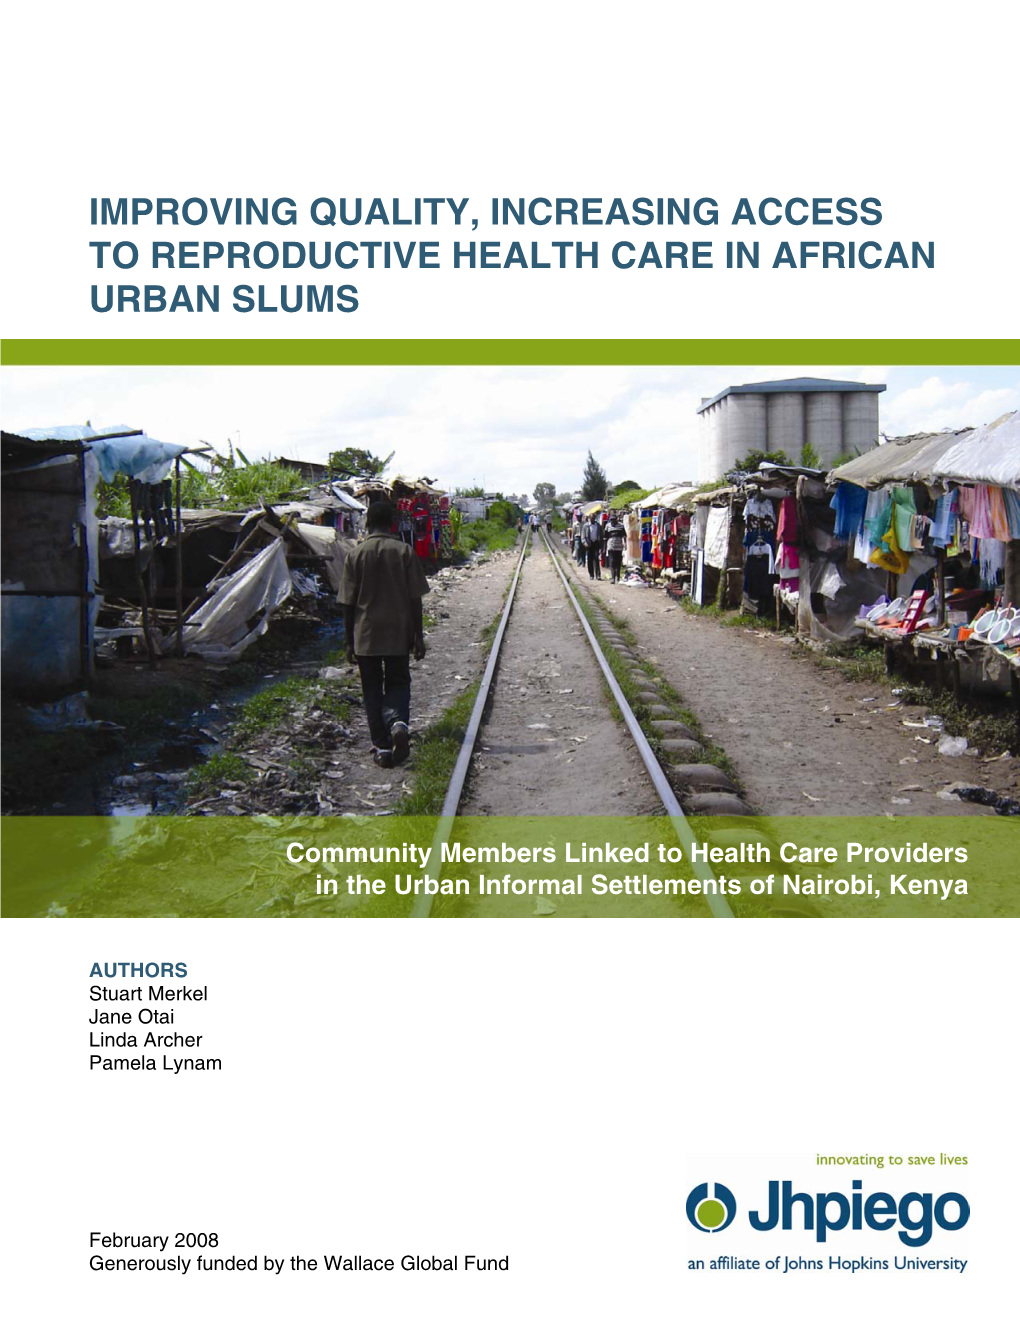 Improving Quality, Increasing Access to Reproductive Health Care in African Urban Slums